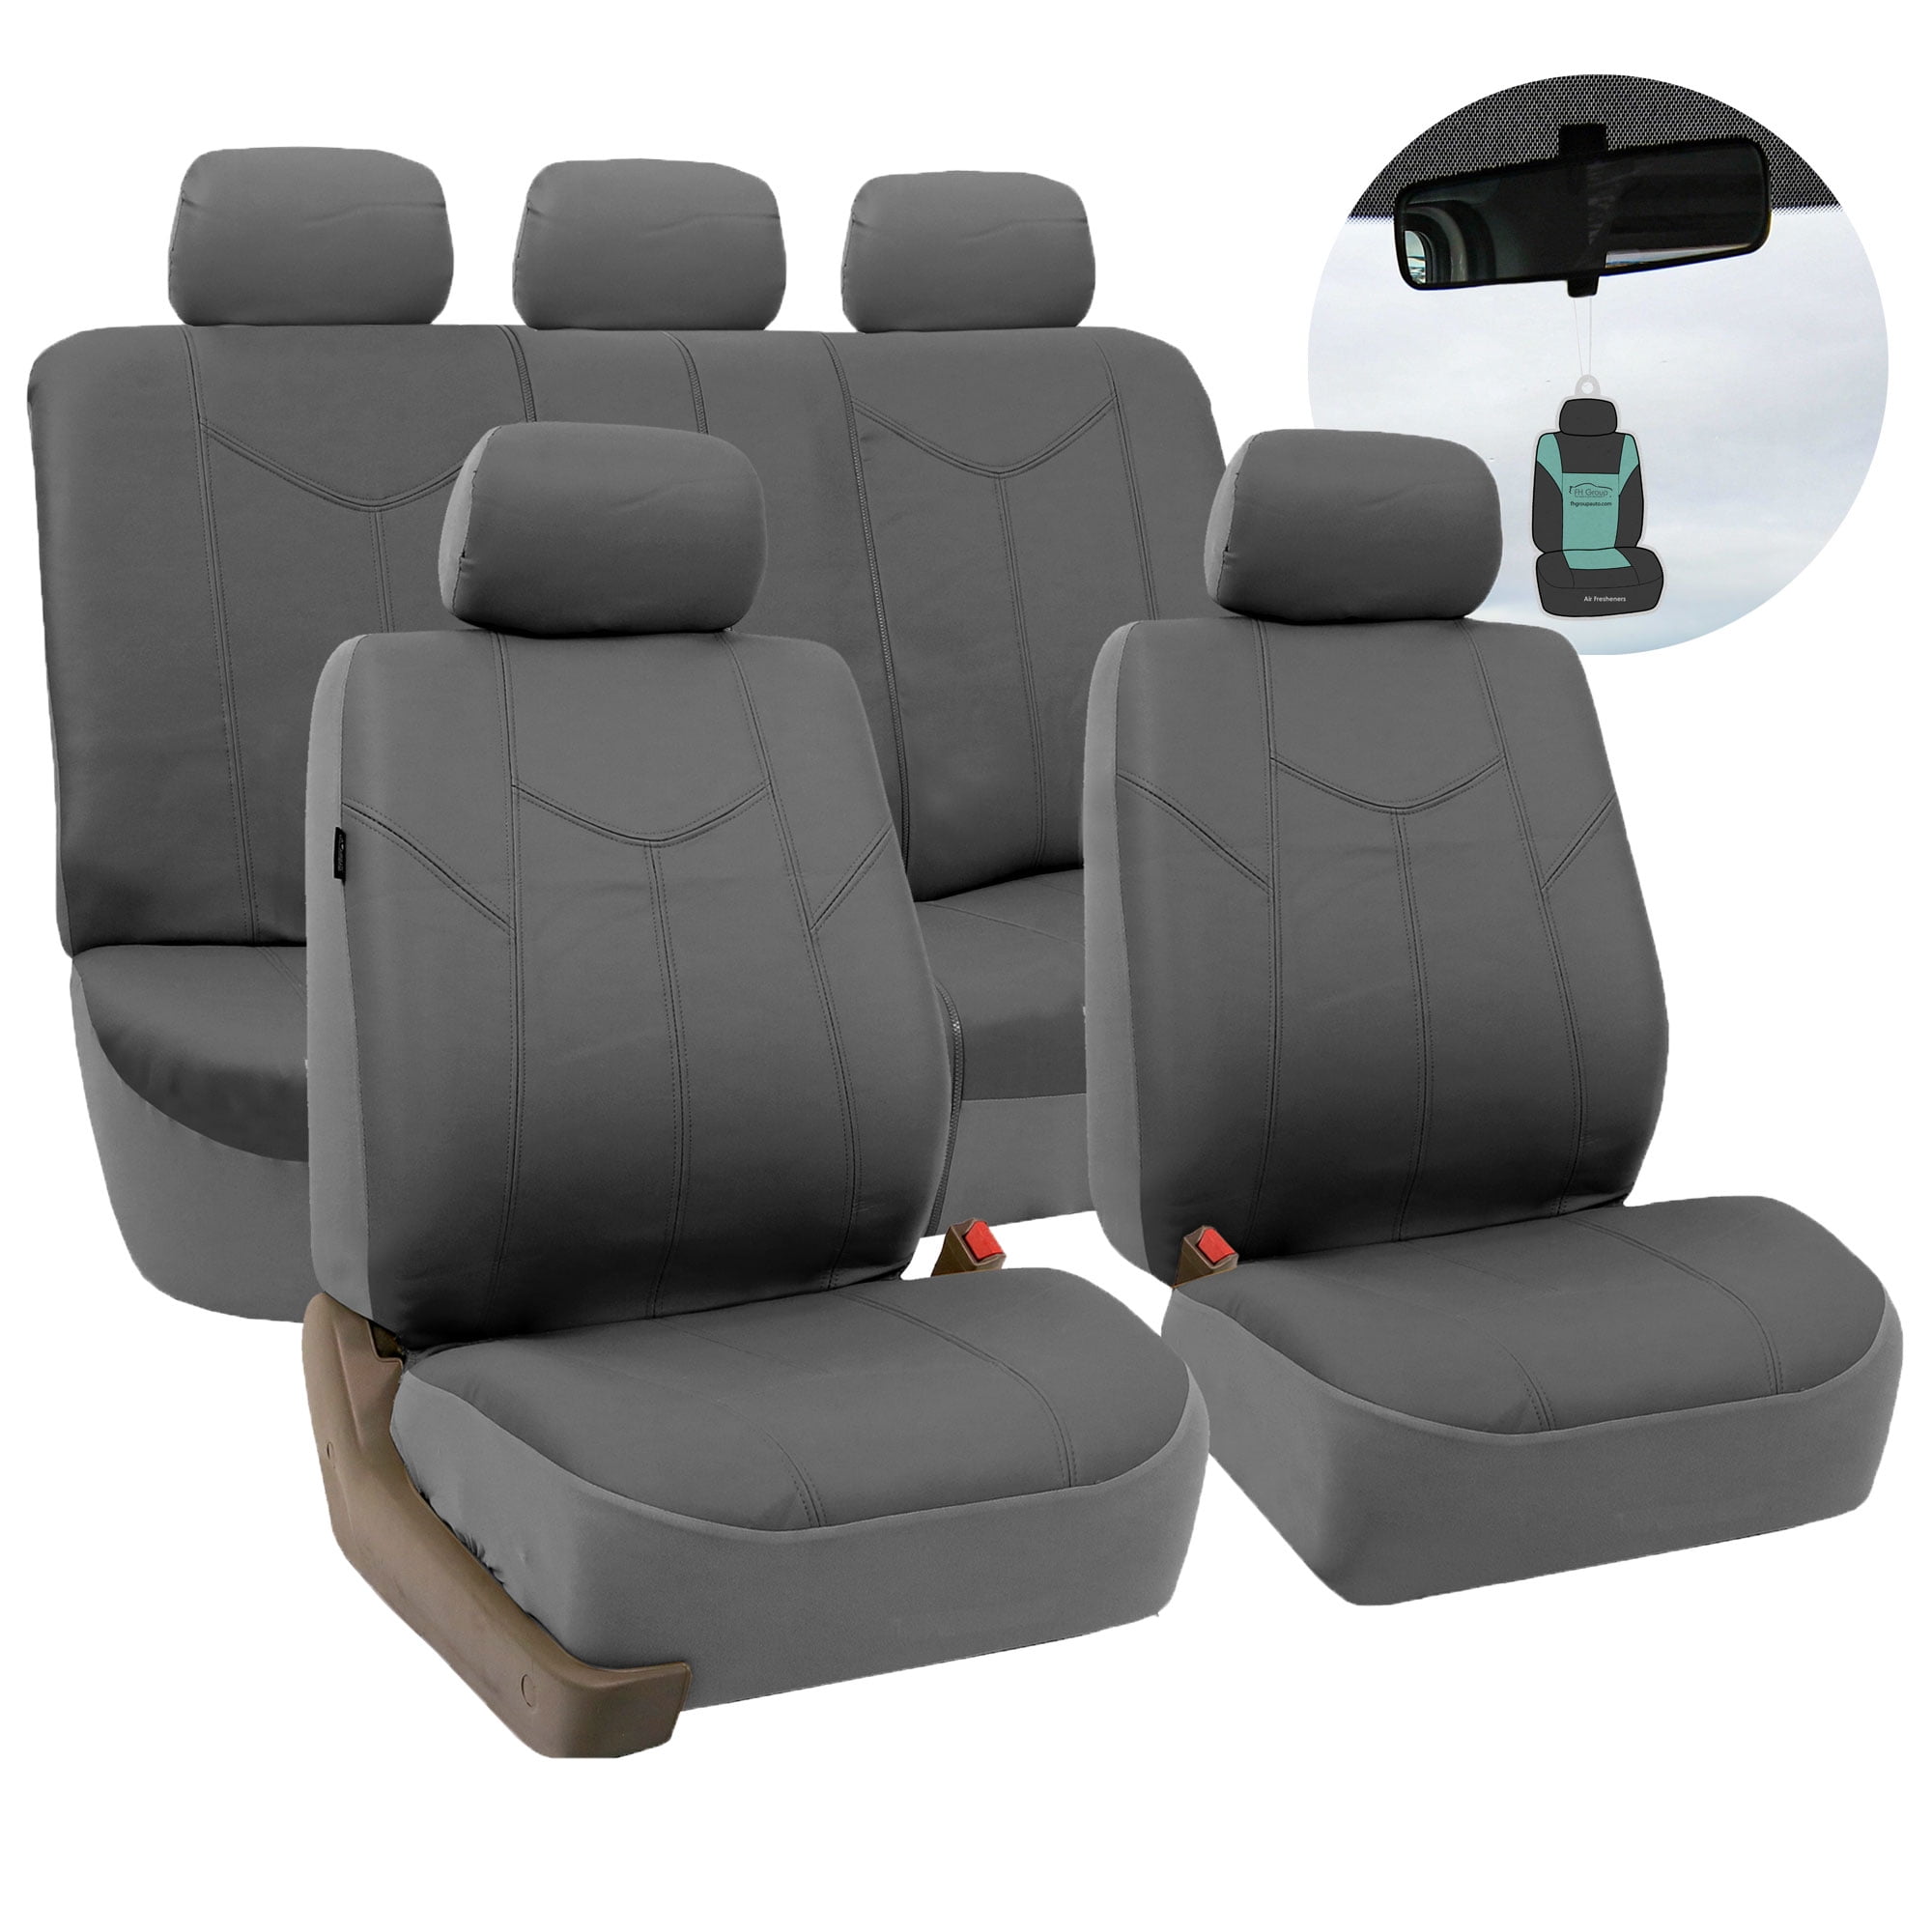 FH Group Rome PU Leather Full Set Seat Covers with Bonus Air Freshener